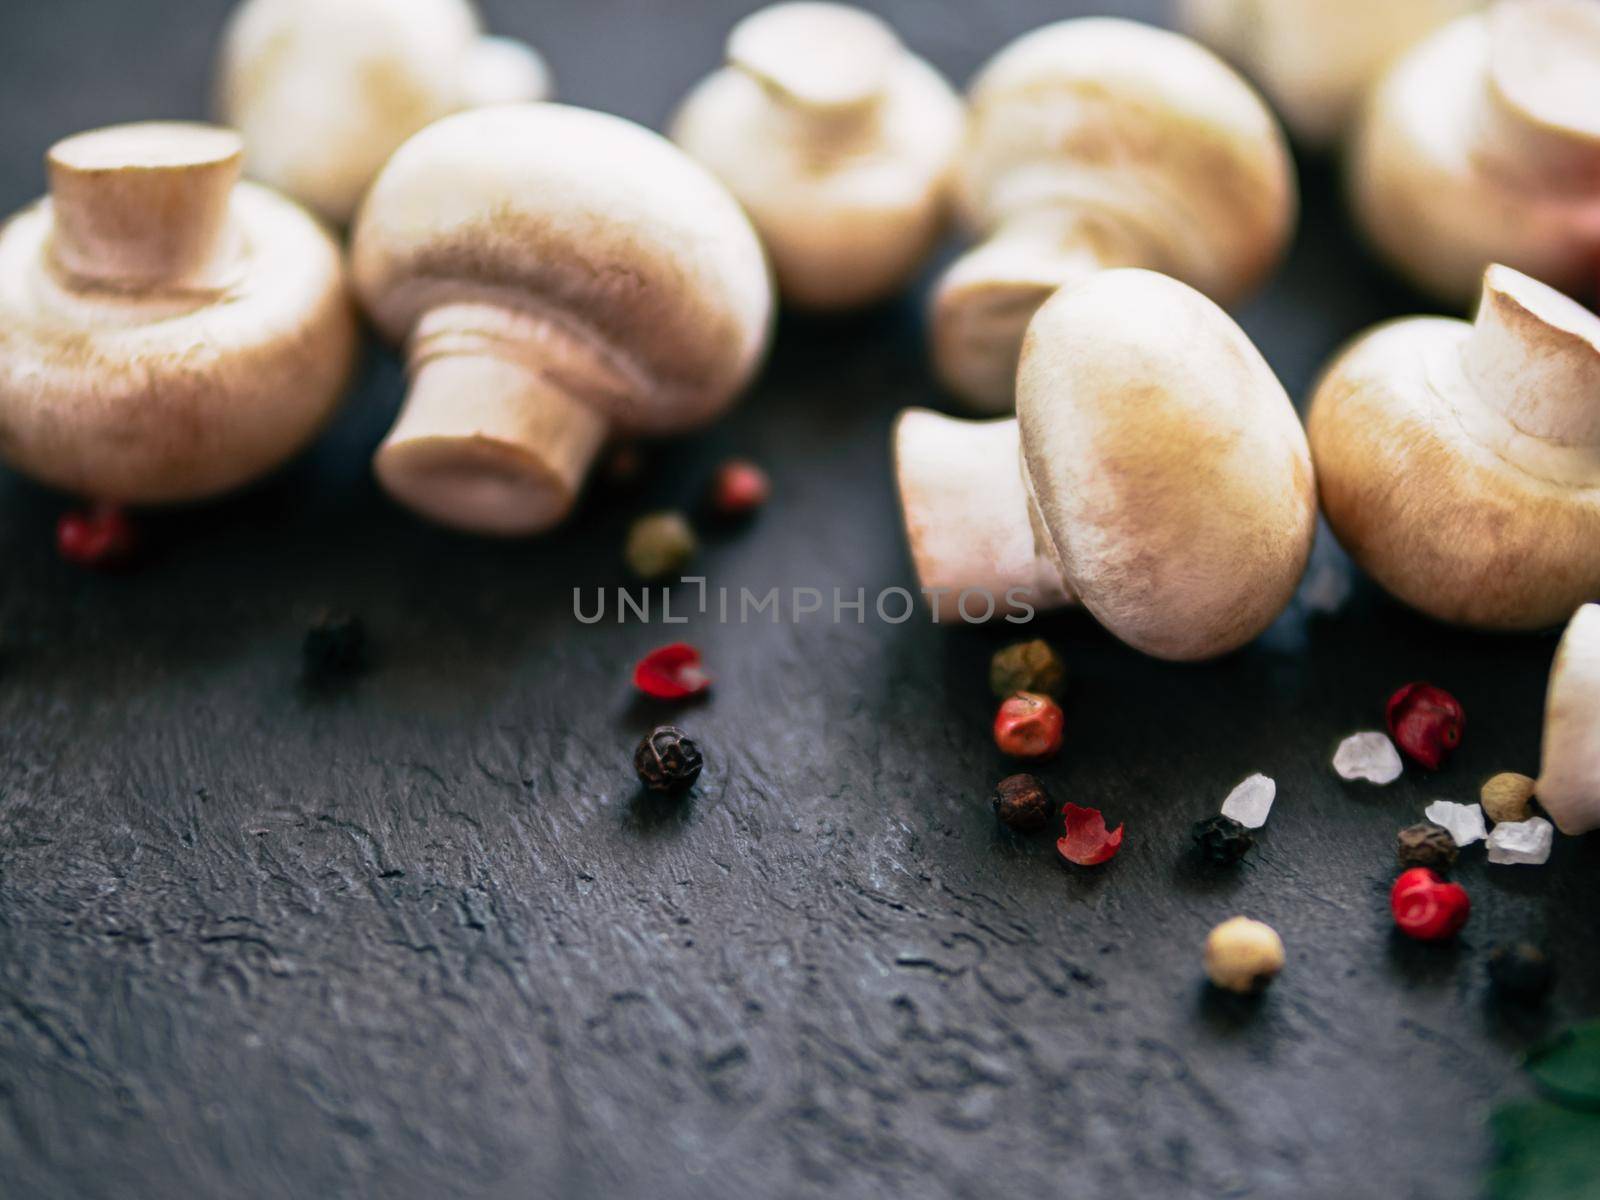 Mini champignons with copy space on left edge. Raw whole mushrooms on black background, copy space